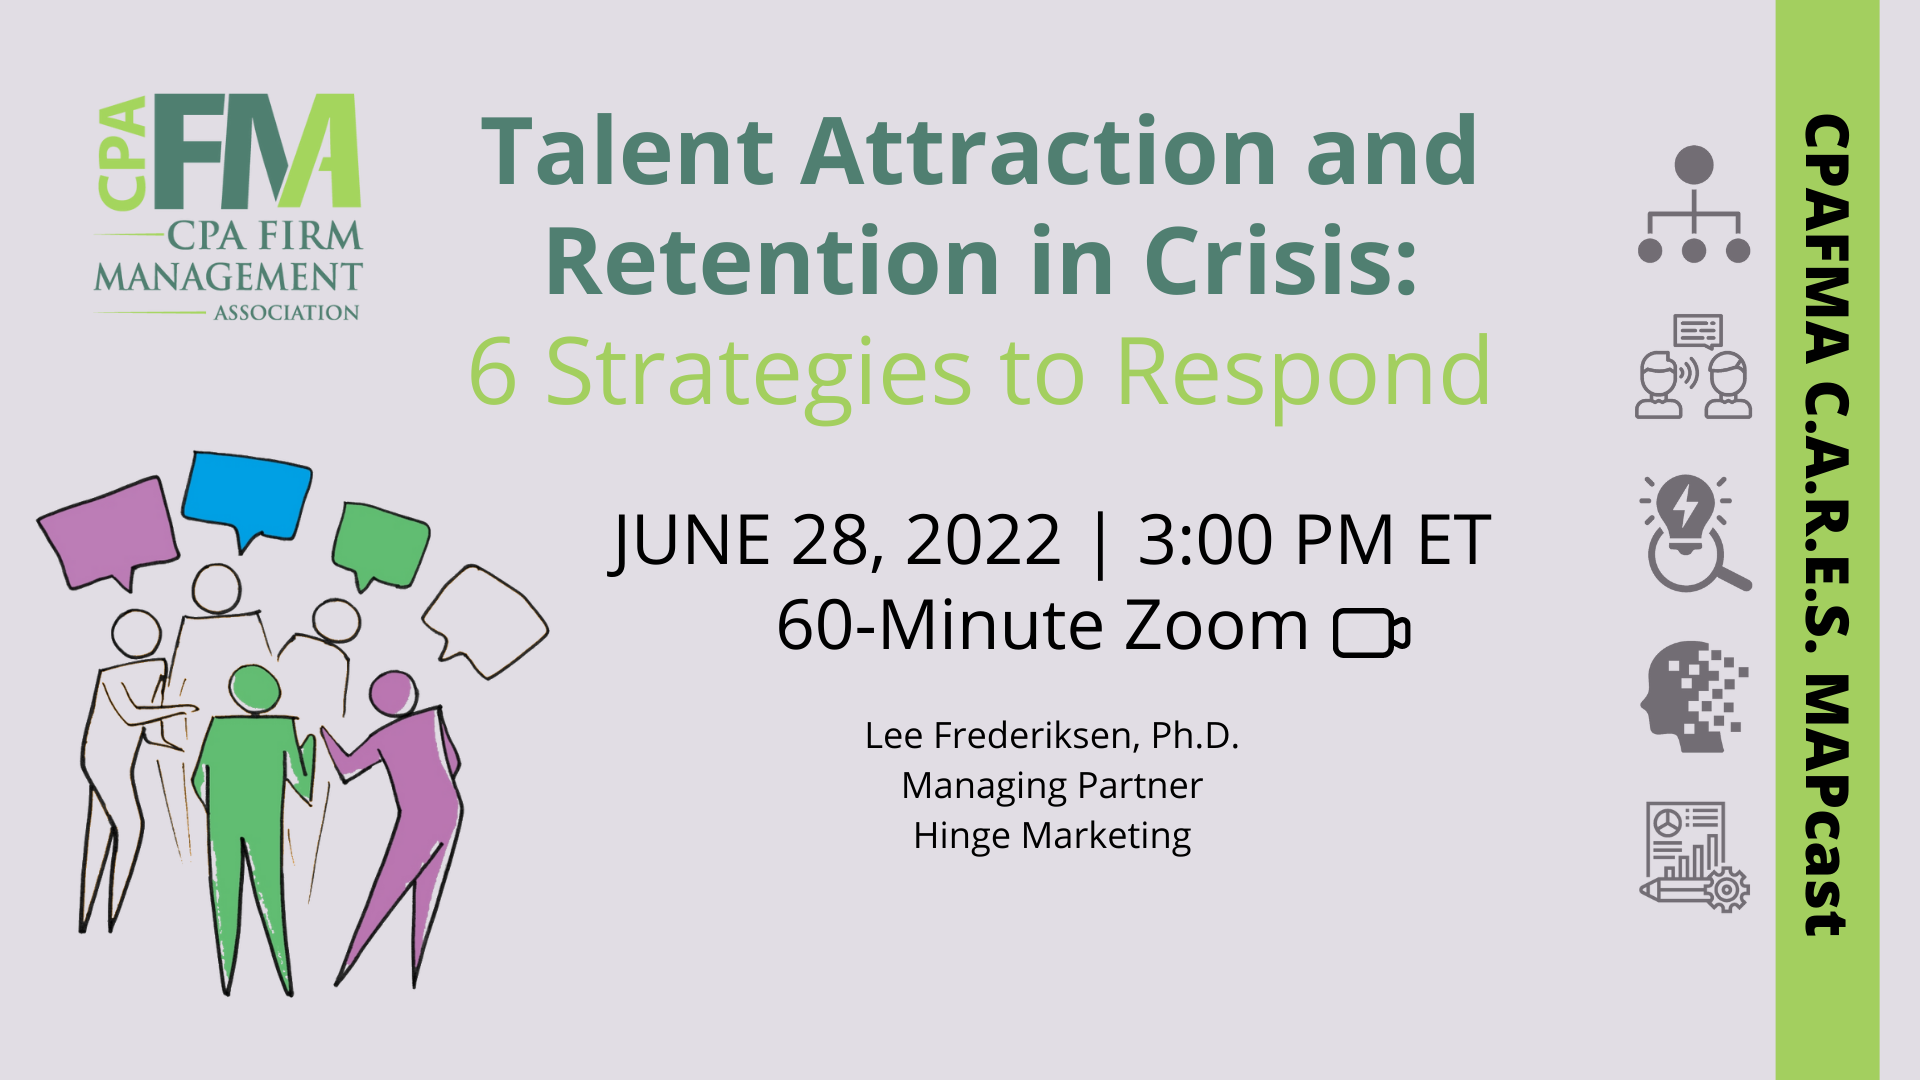 Talent Attraction and Retention in Crisis: 6 Strategies to Respond